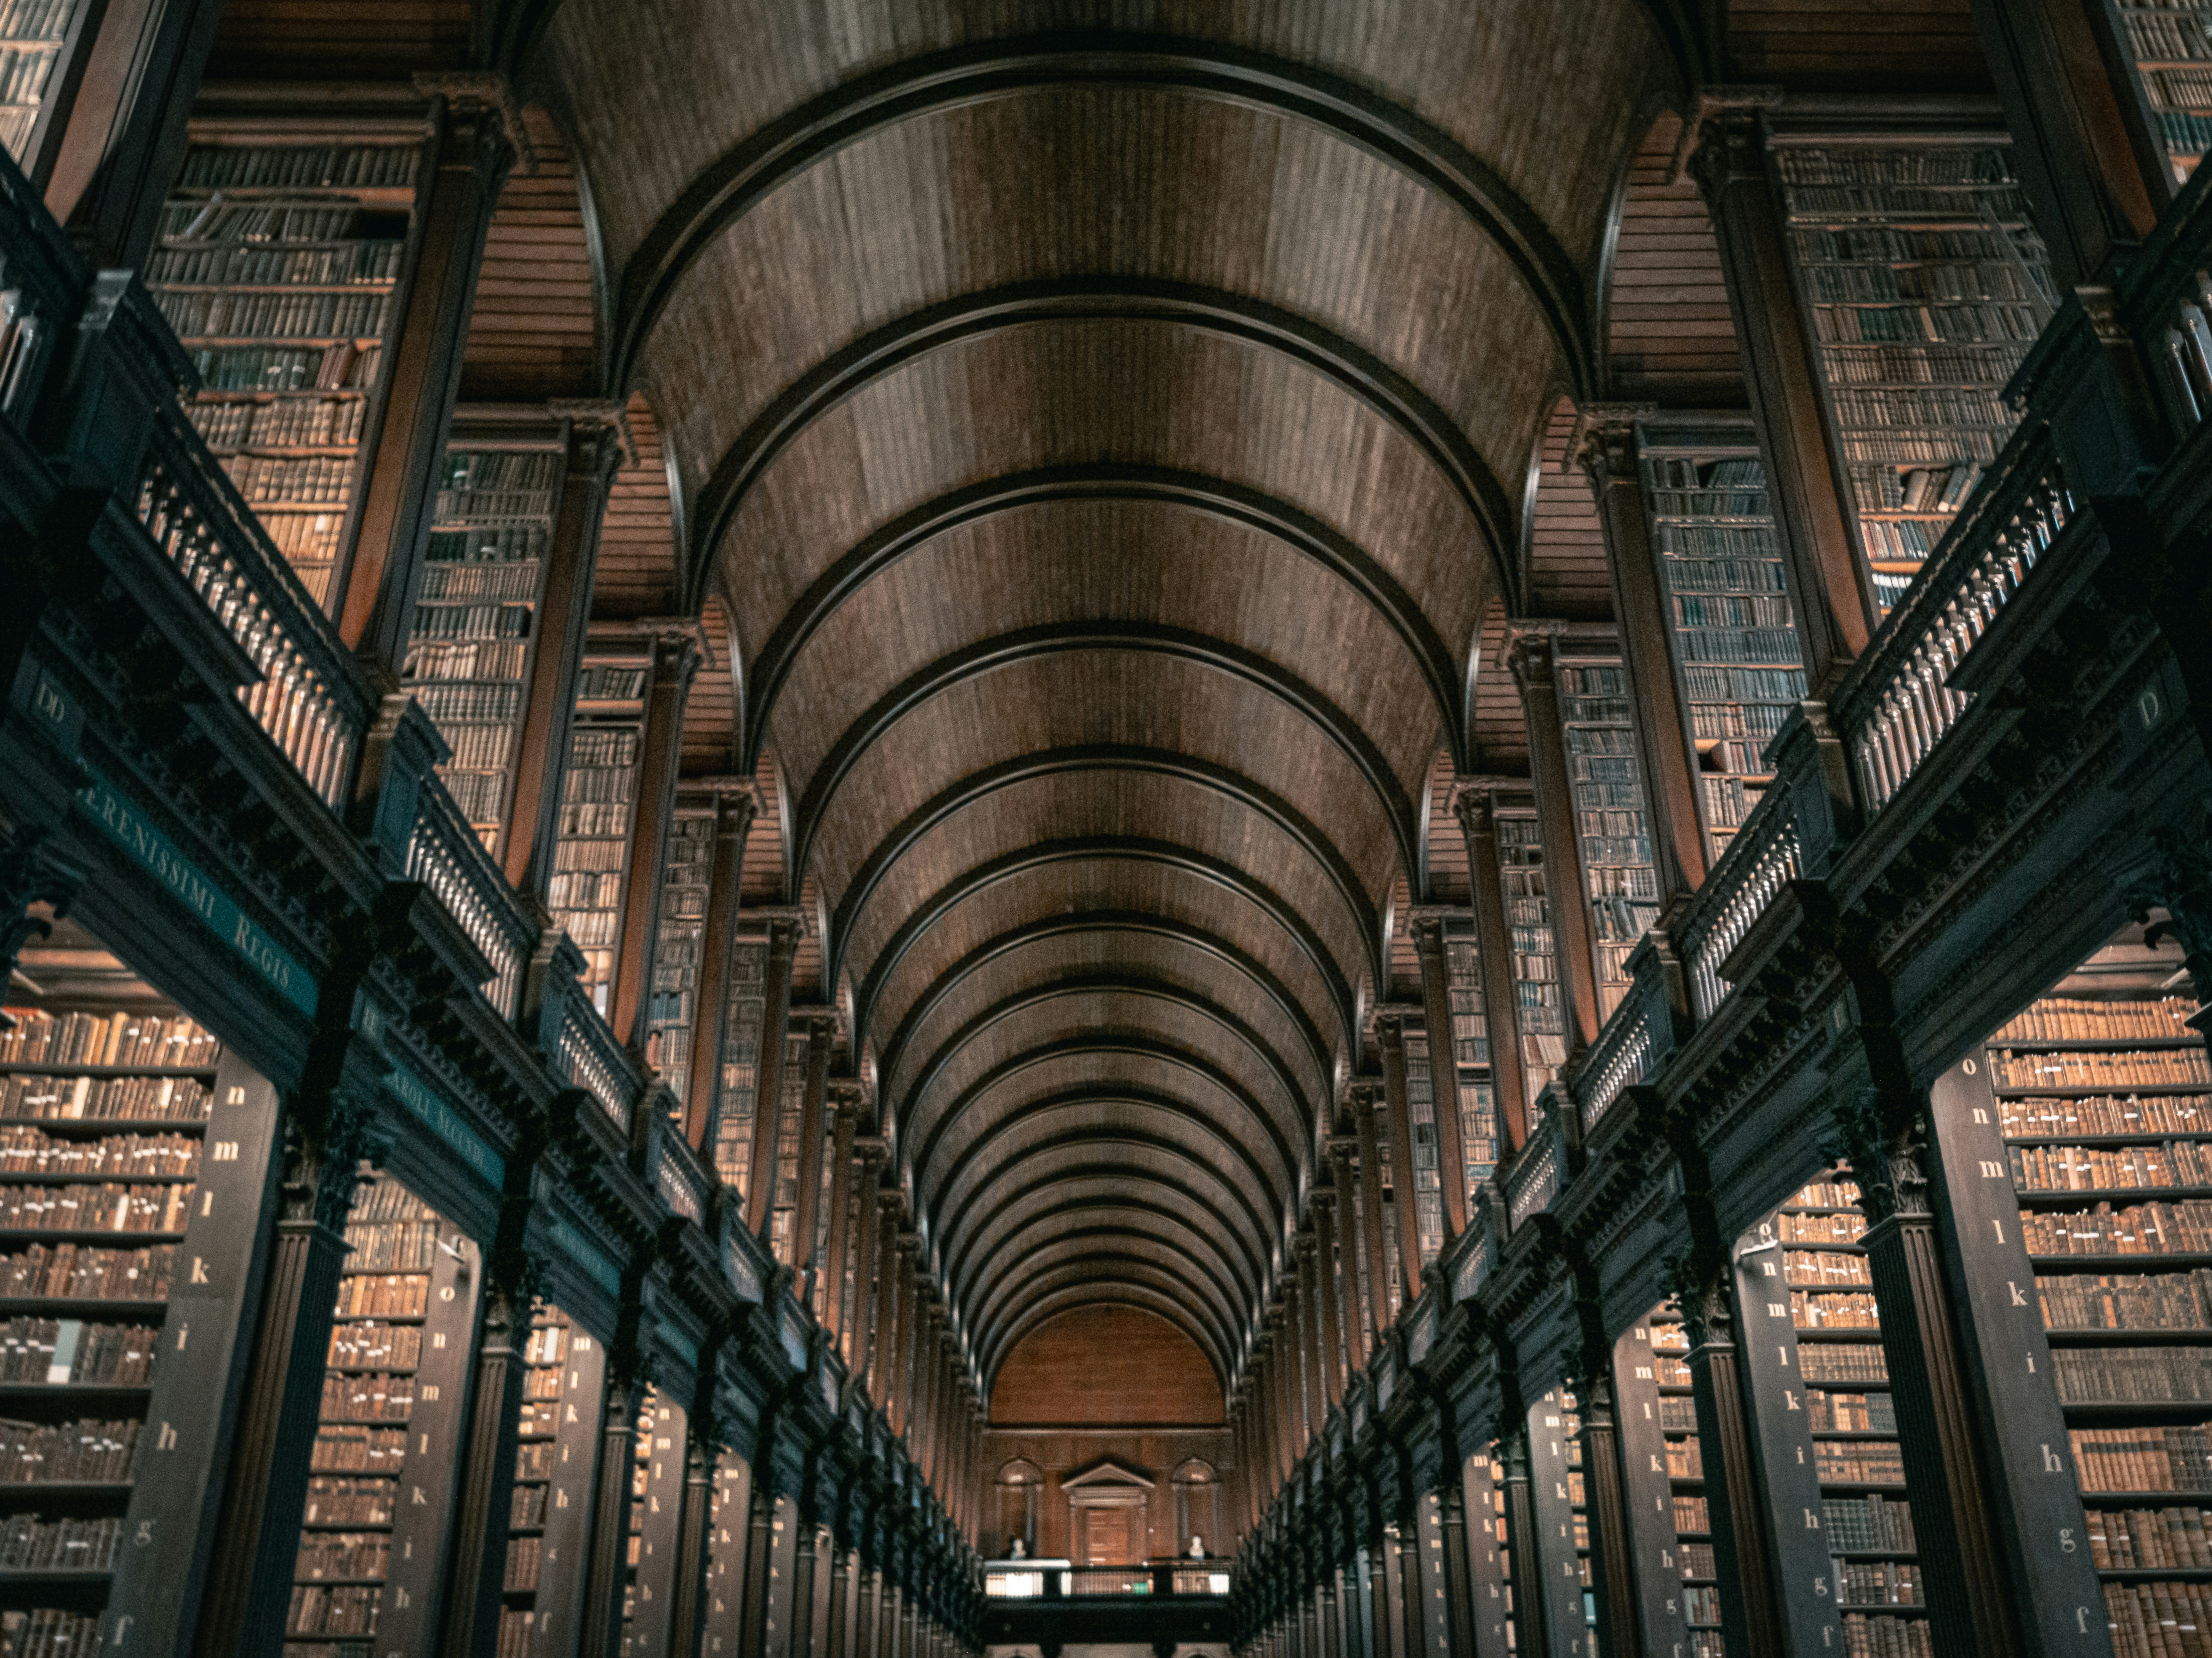 The Library of University Tunnels